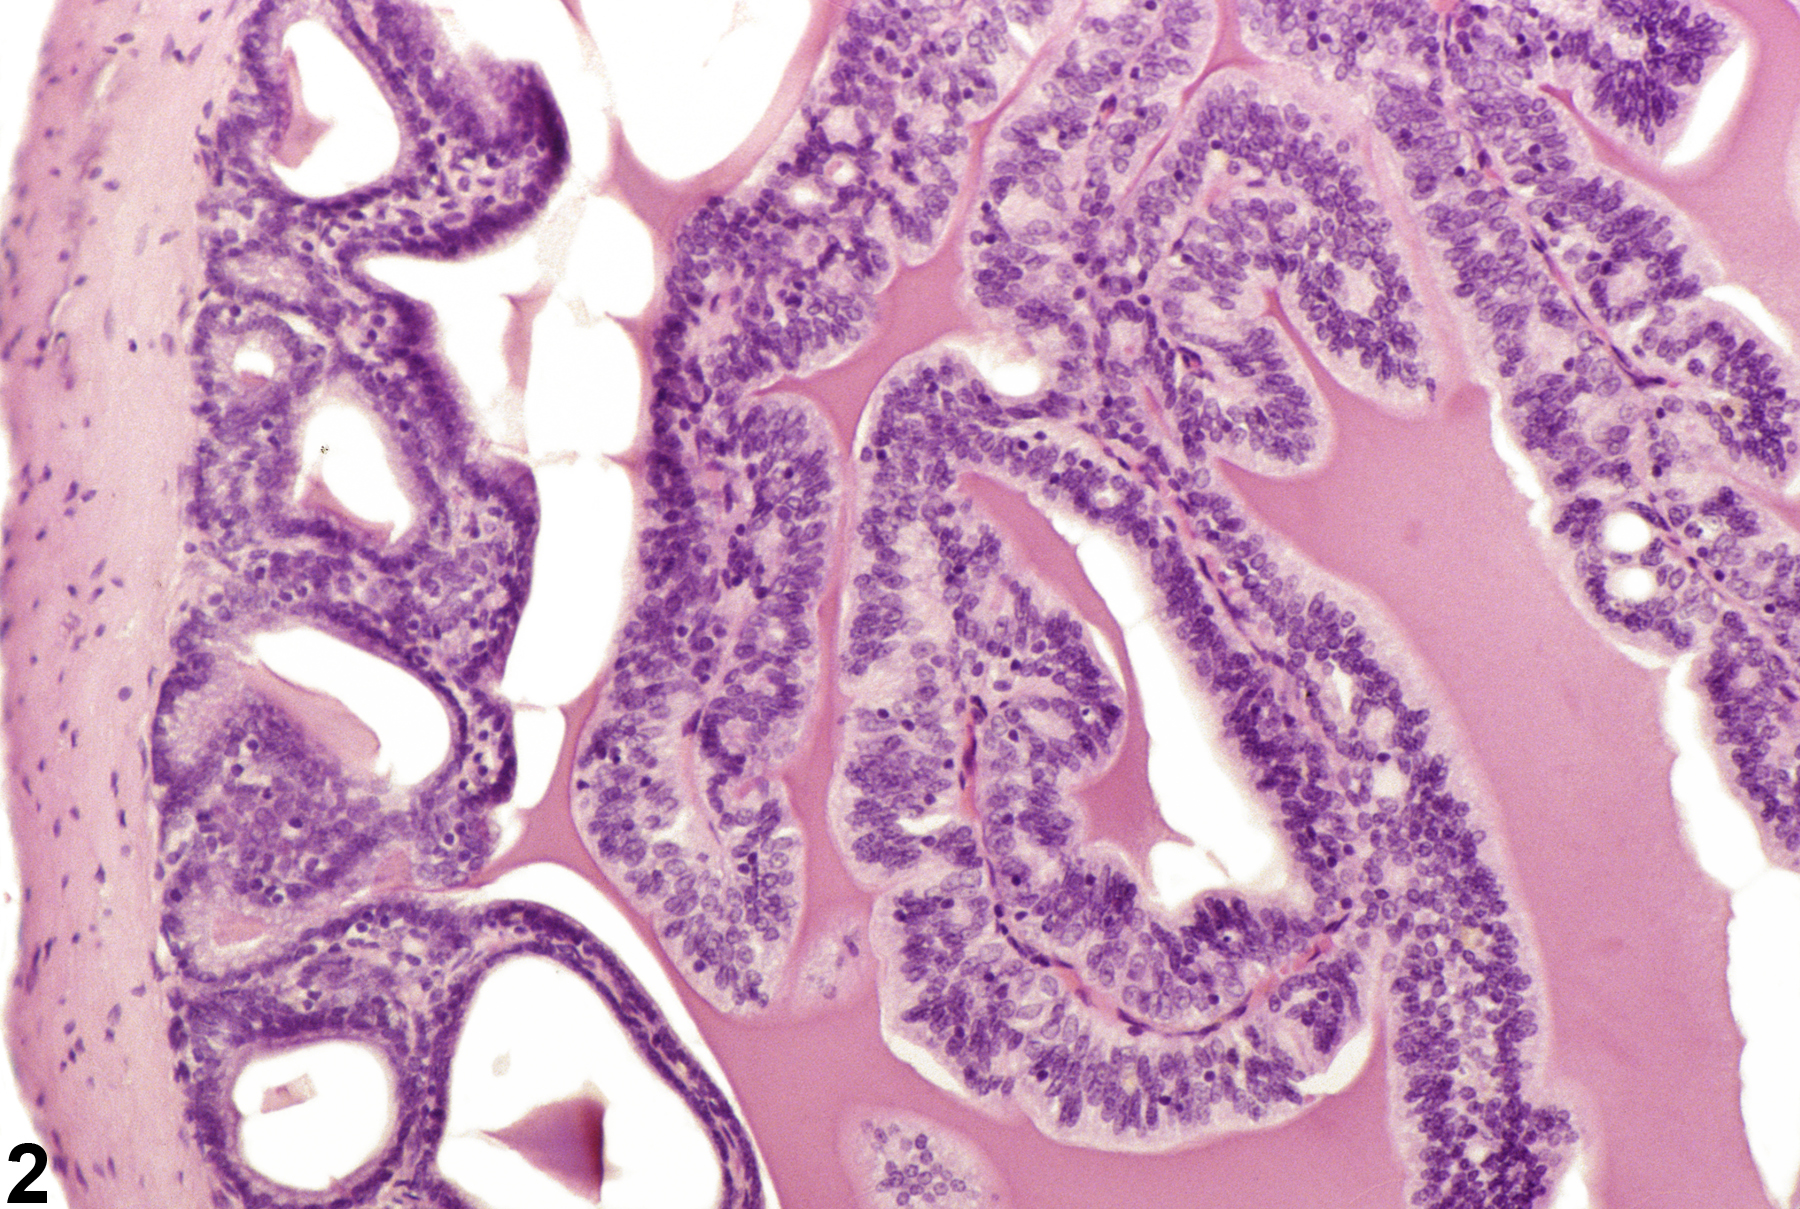 Image of epithelial hyperplasia in the seminal vesicle from a male F344/N rat in an chronic study